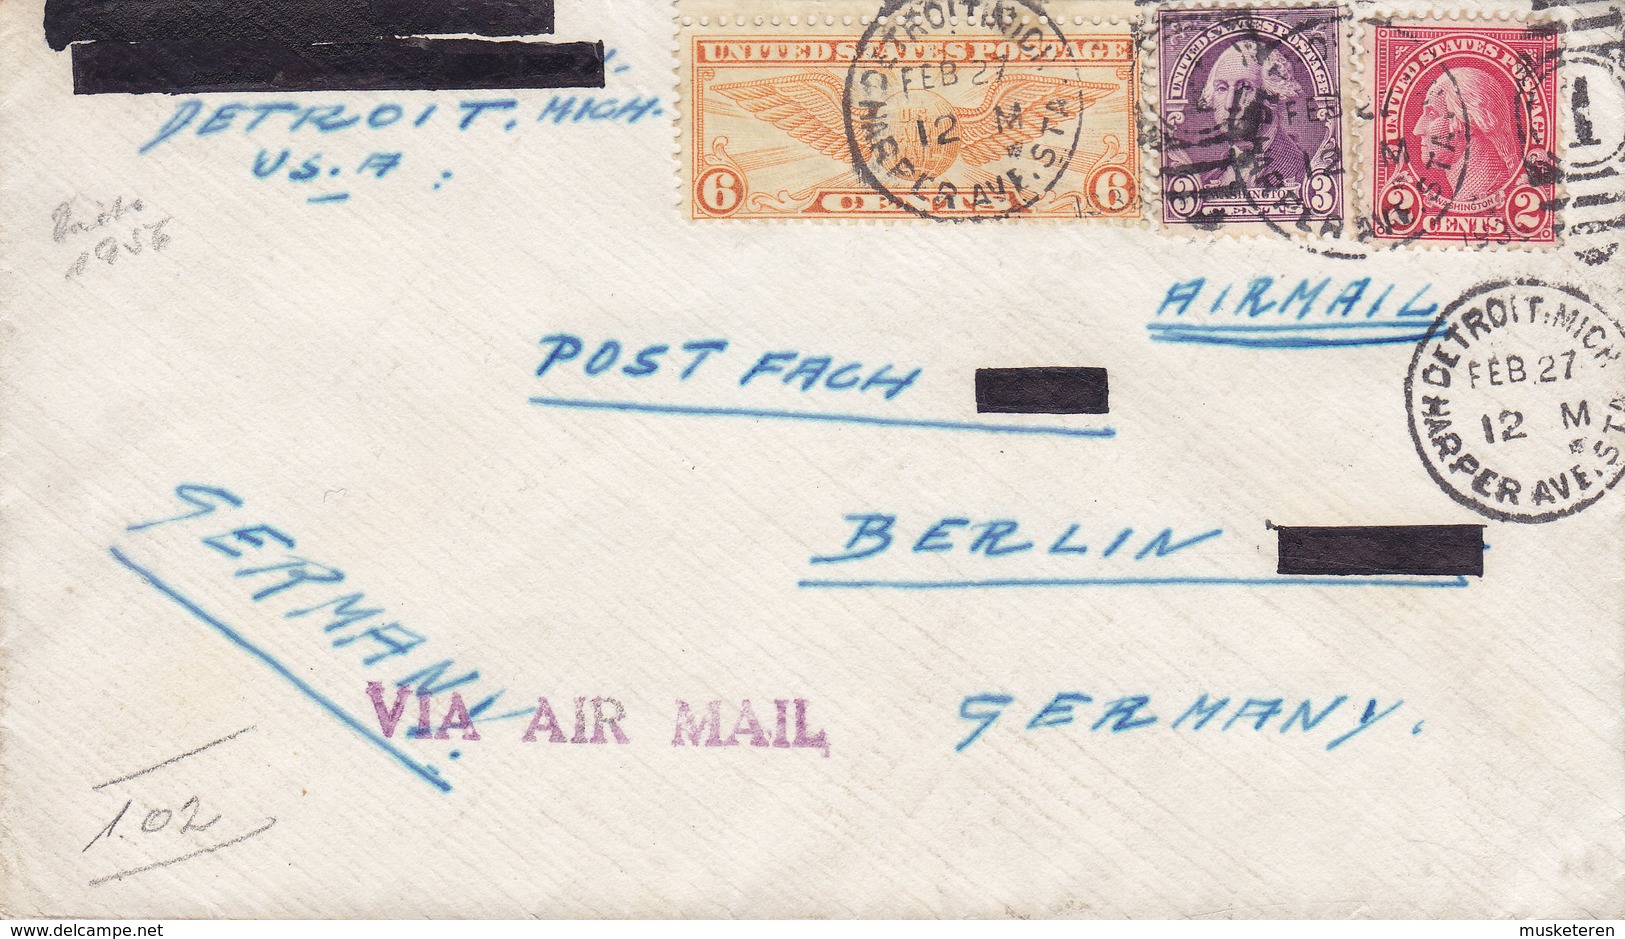 United States VIA AIR MAIL Line Cds. DETROIT Mich. HARPER AVE. ST. 1912 BERLIN Germany 3-Colour Franking - Briefe U. Dokumente